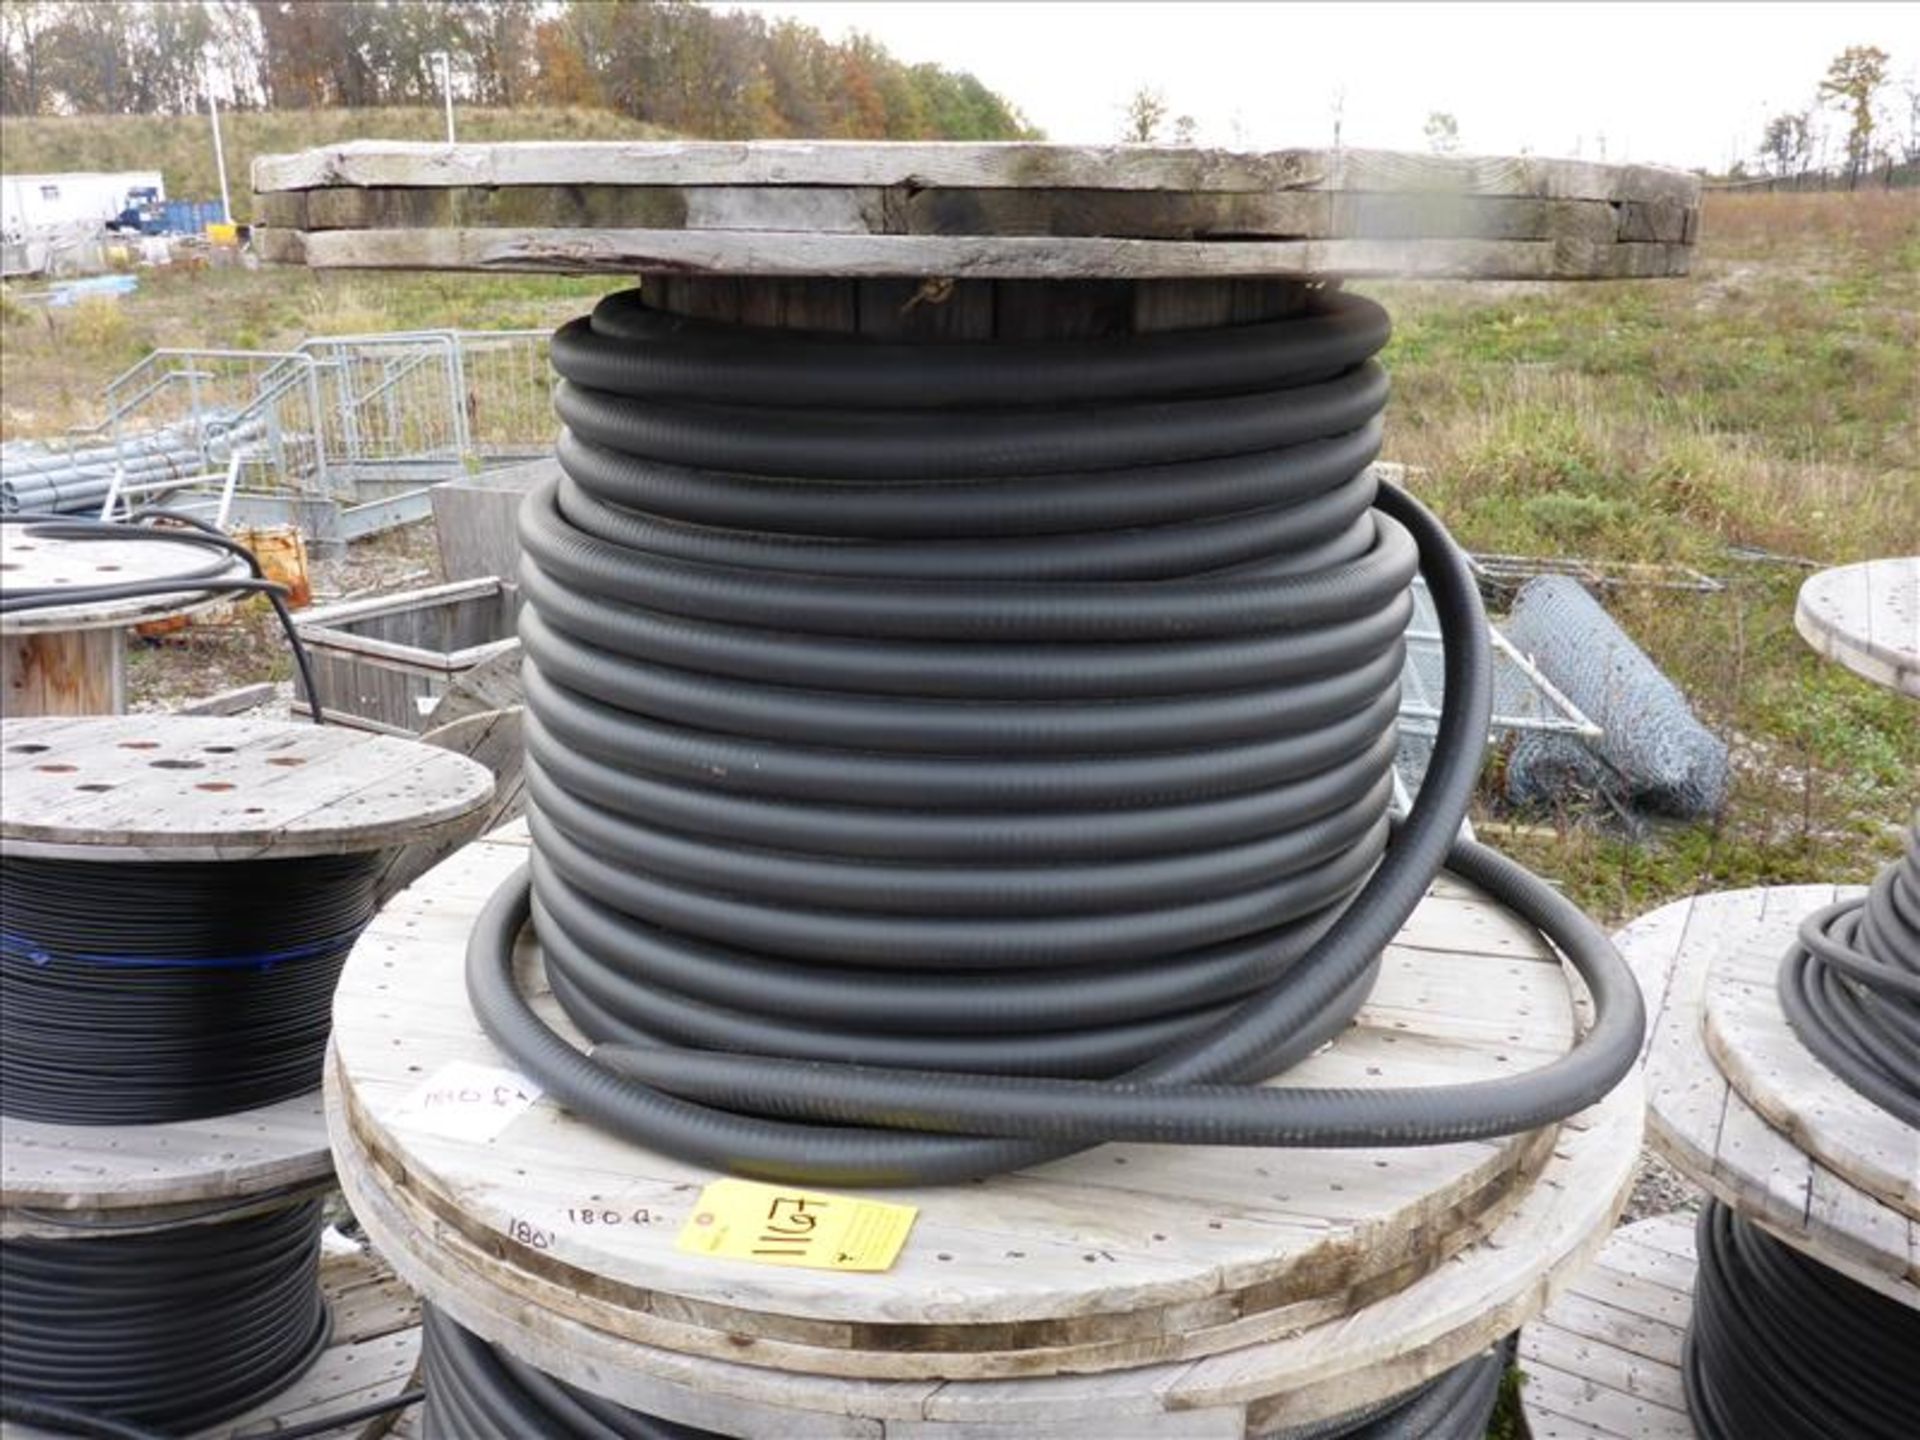 reel of electrical cable, approx. 180 ft., 00087 M -I- SEP/2013 Nexans Firex -II 2-0 AWG/3C Teck